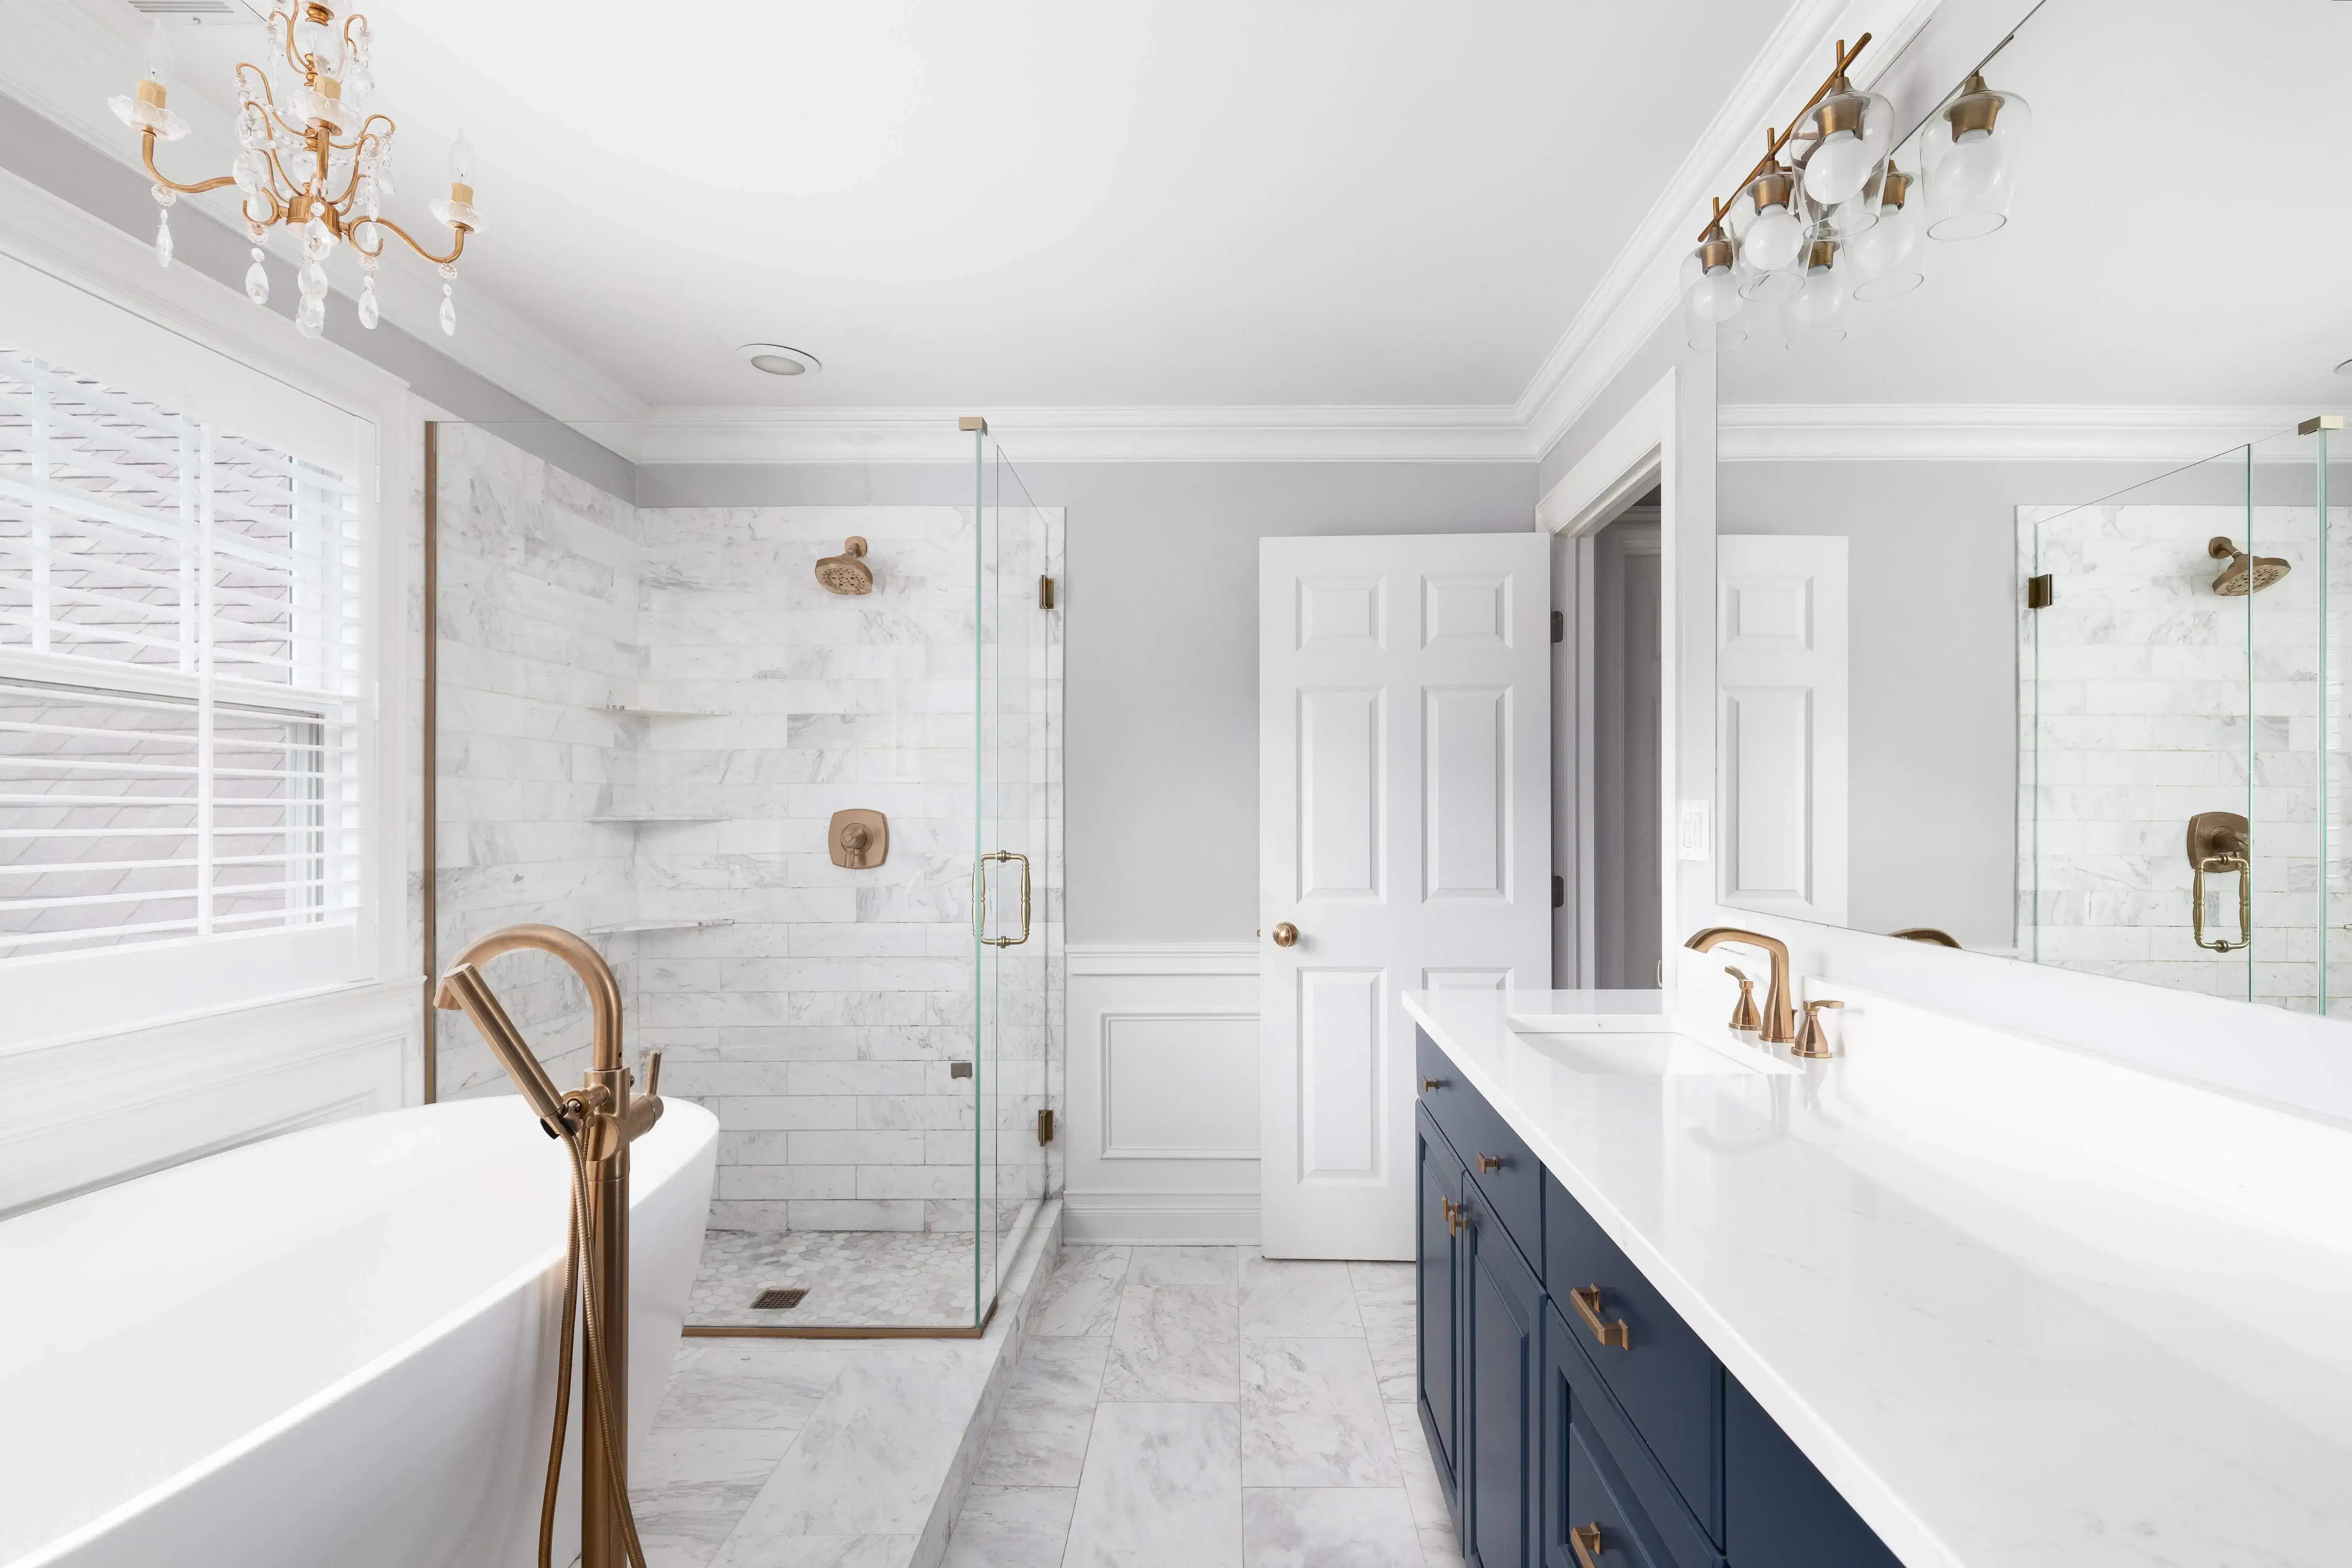 Elegant bathroom remodel in a Philadelphia home featuring a modern bathtub, glass-enclosed shower, and double vanity.